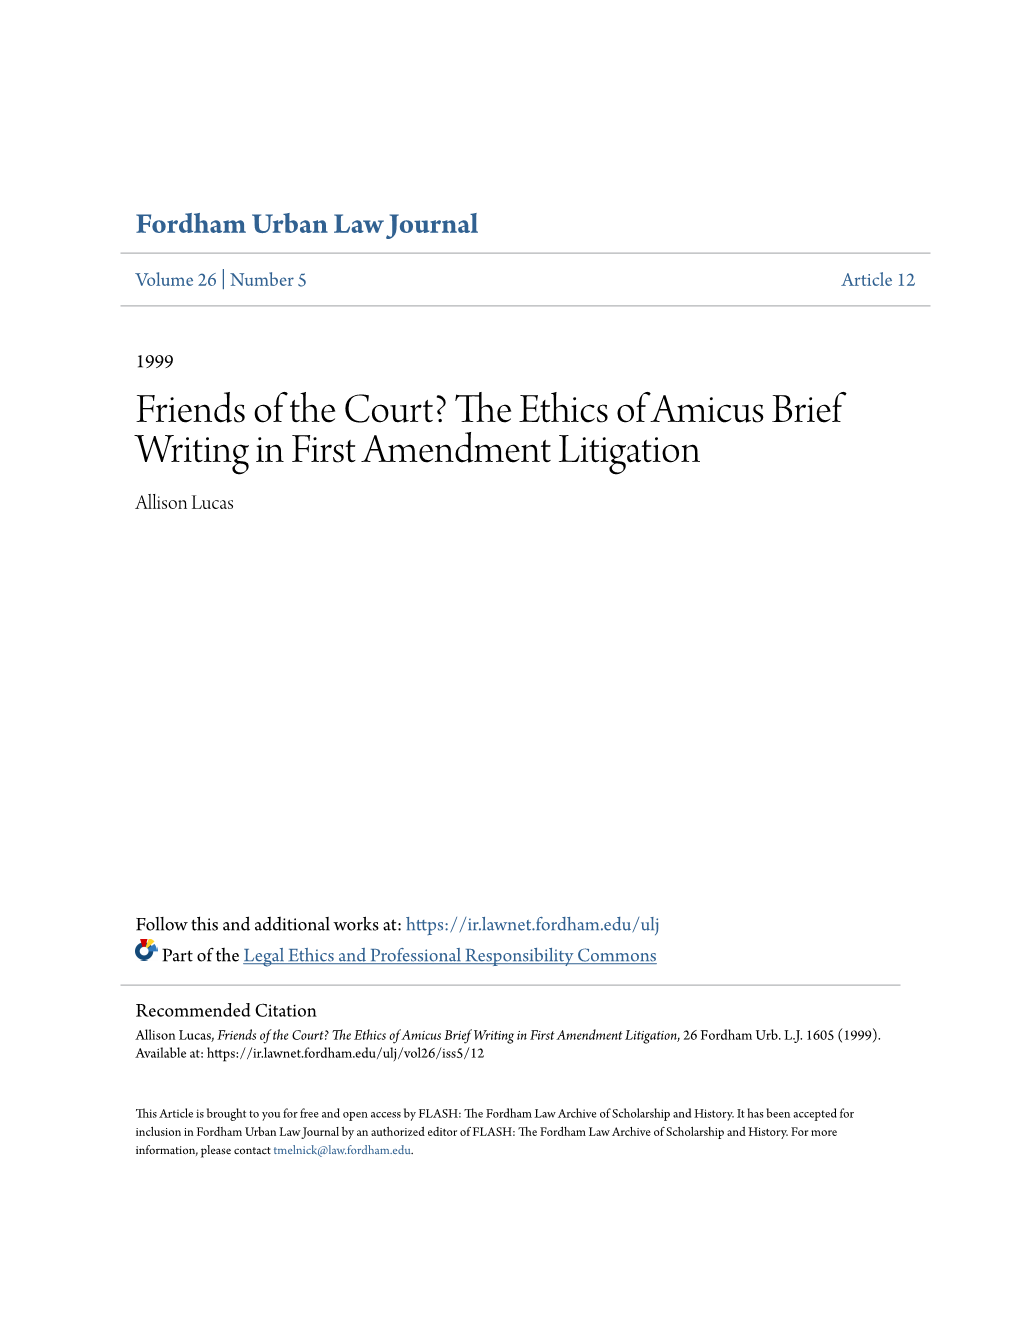 The Ethics of Amicus Brief Writing in First Amendment Litigation, 26 Fordham Urb